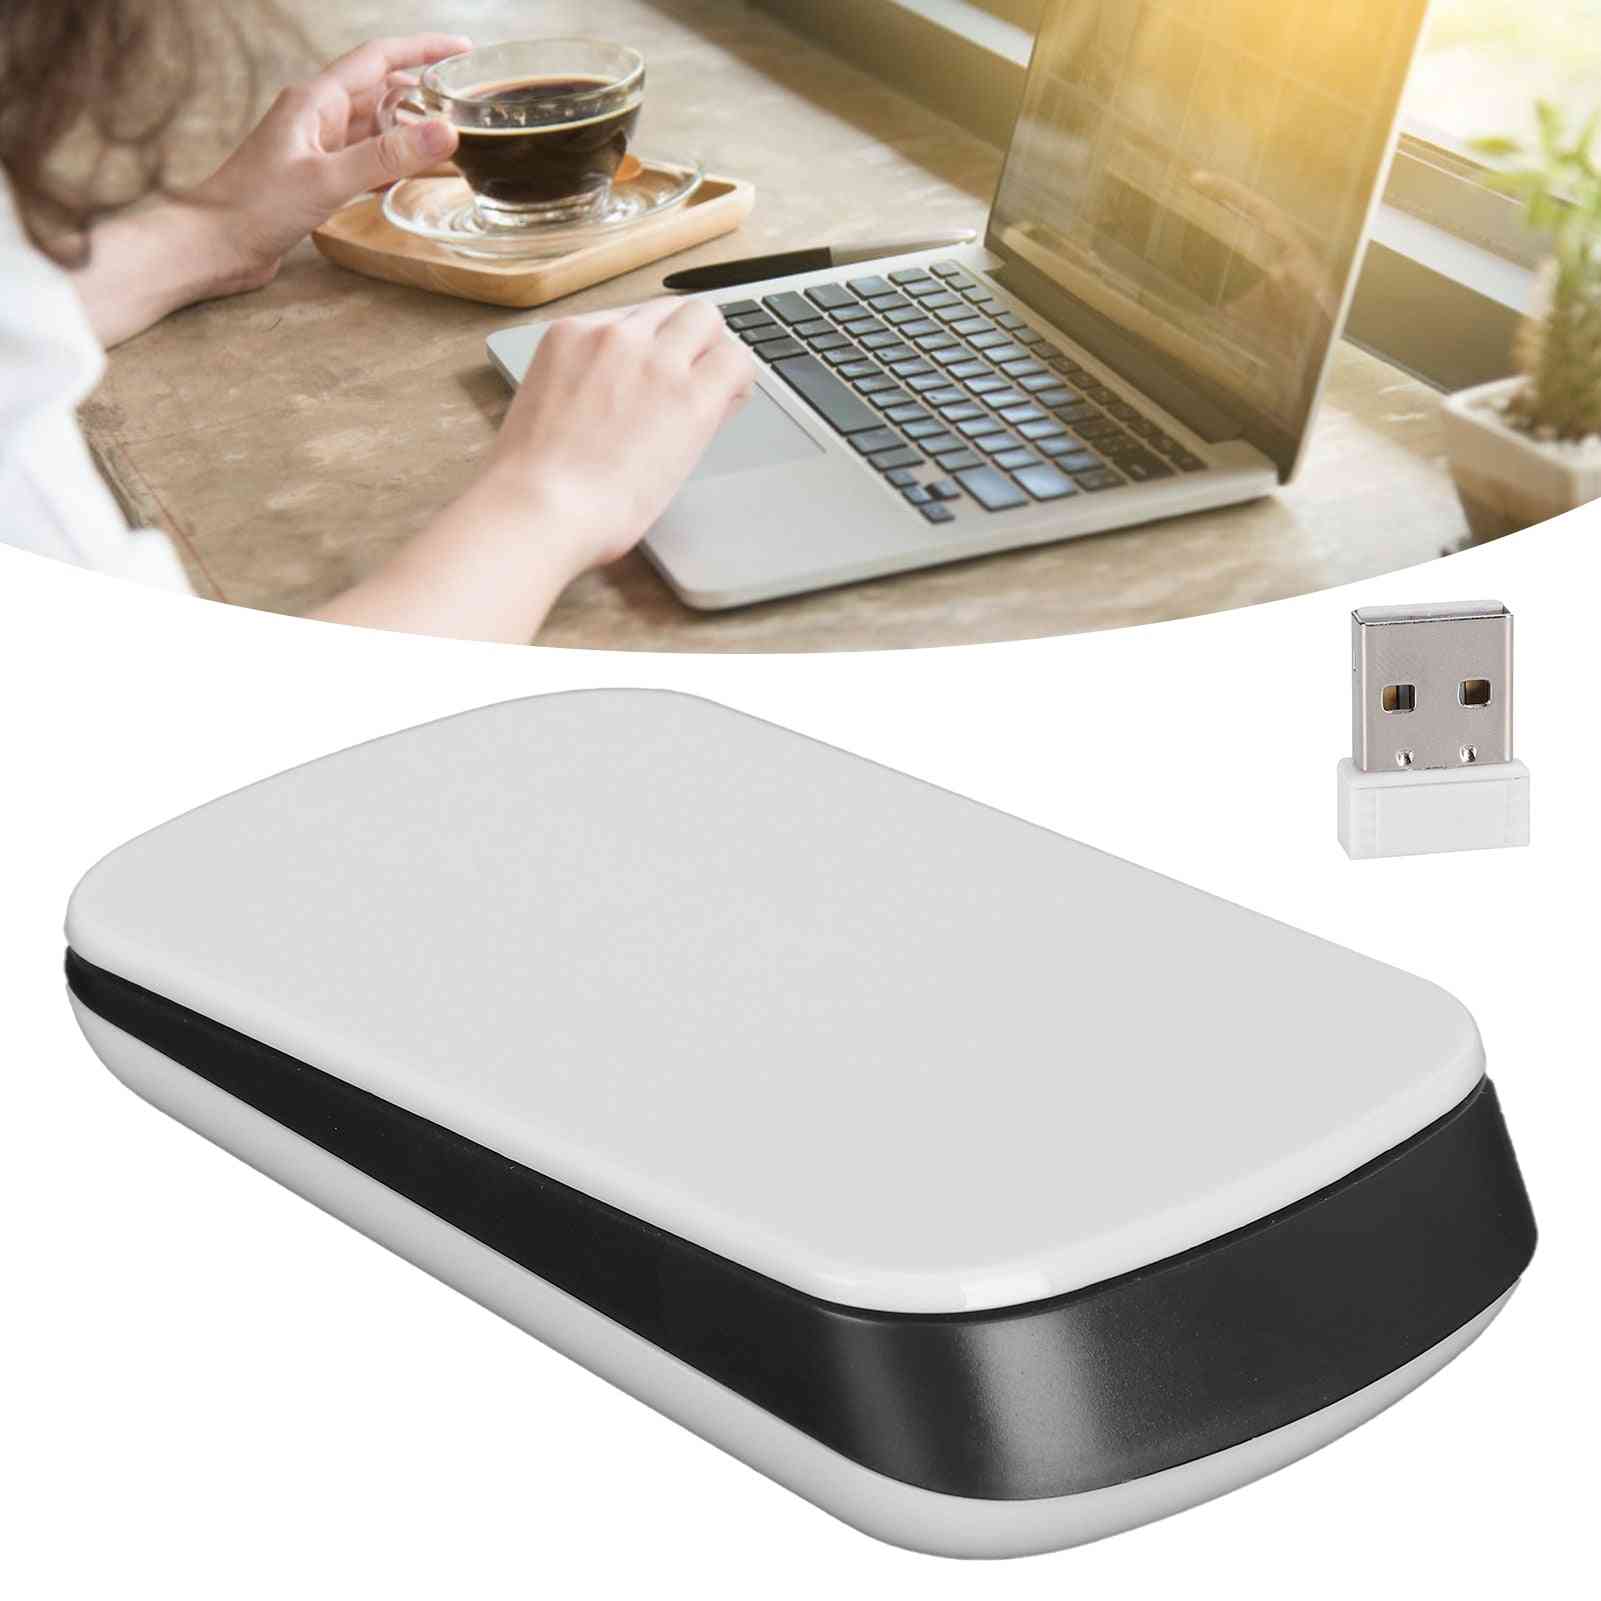 Touchpad Switch Wireless Usb Optical 2.4g Receiver Super Slim Mouse For Pc, Laptop